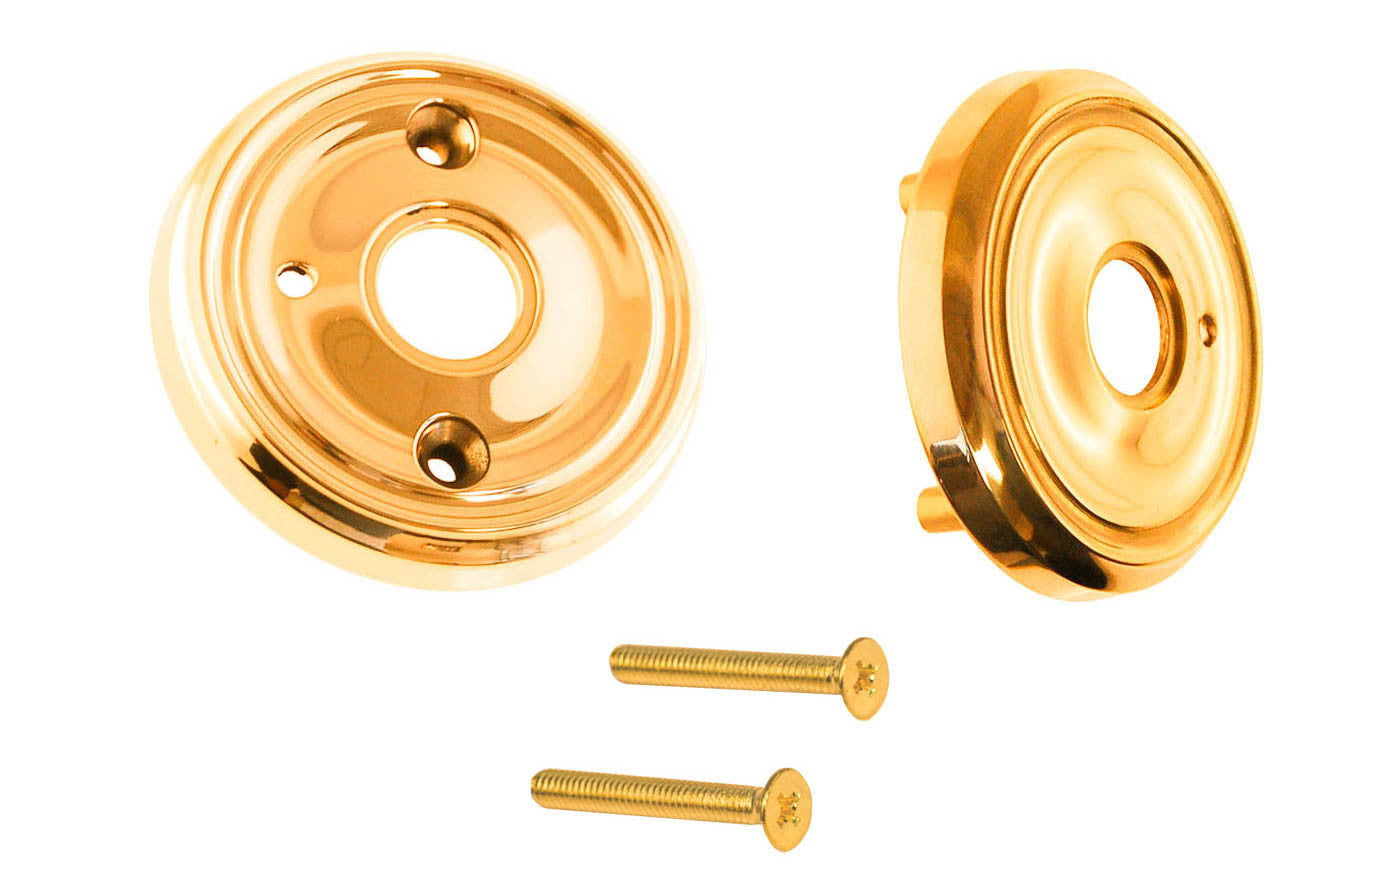 Classic Solid Brass Rosette Set ~ Privacy (Locking) ~ Non-Lacquered Brass (will patina naturally over time) ~ Vintage-style Hardware · Classic & traditional ~ 2-3/4" diameter doorknob rosettes ~ Made of solid brass material ~ For modern pre-bored (2-1/8" hole) doors